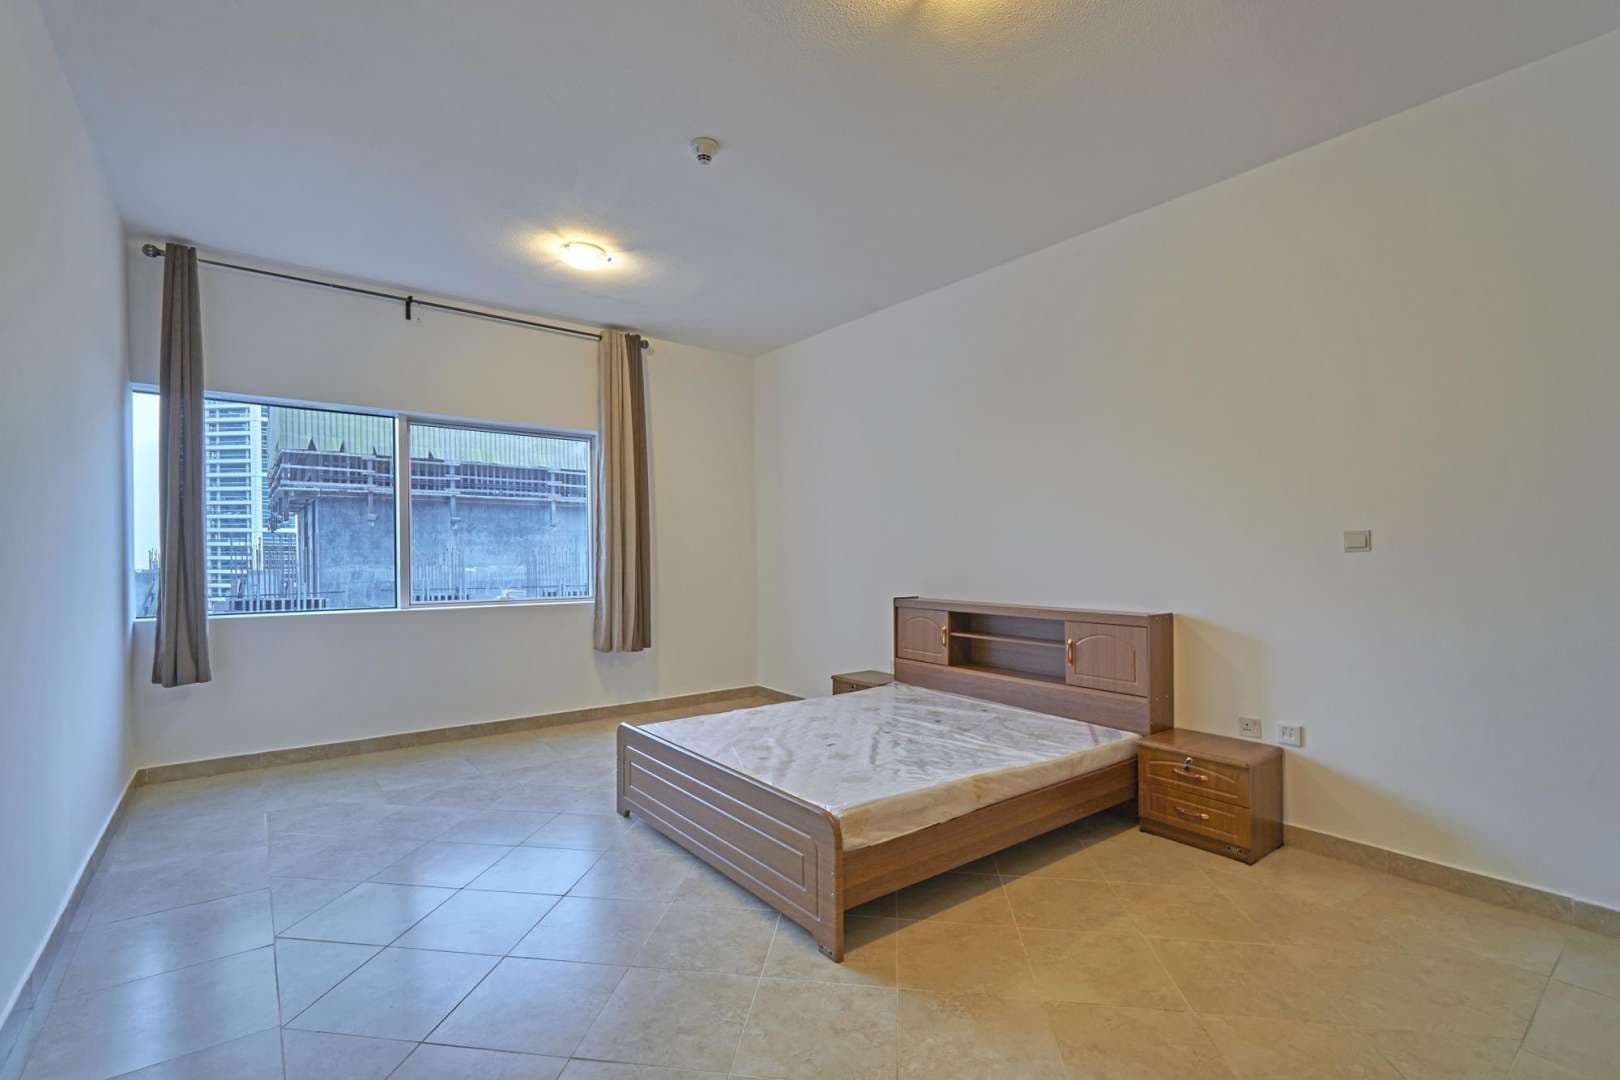 1 Bedroom Apartment For Rent Mag 218 Tower Lp05315 C631e531bfd4d80.jpg